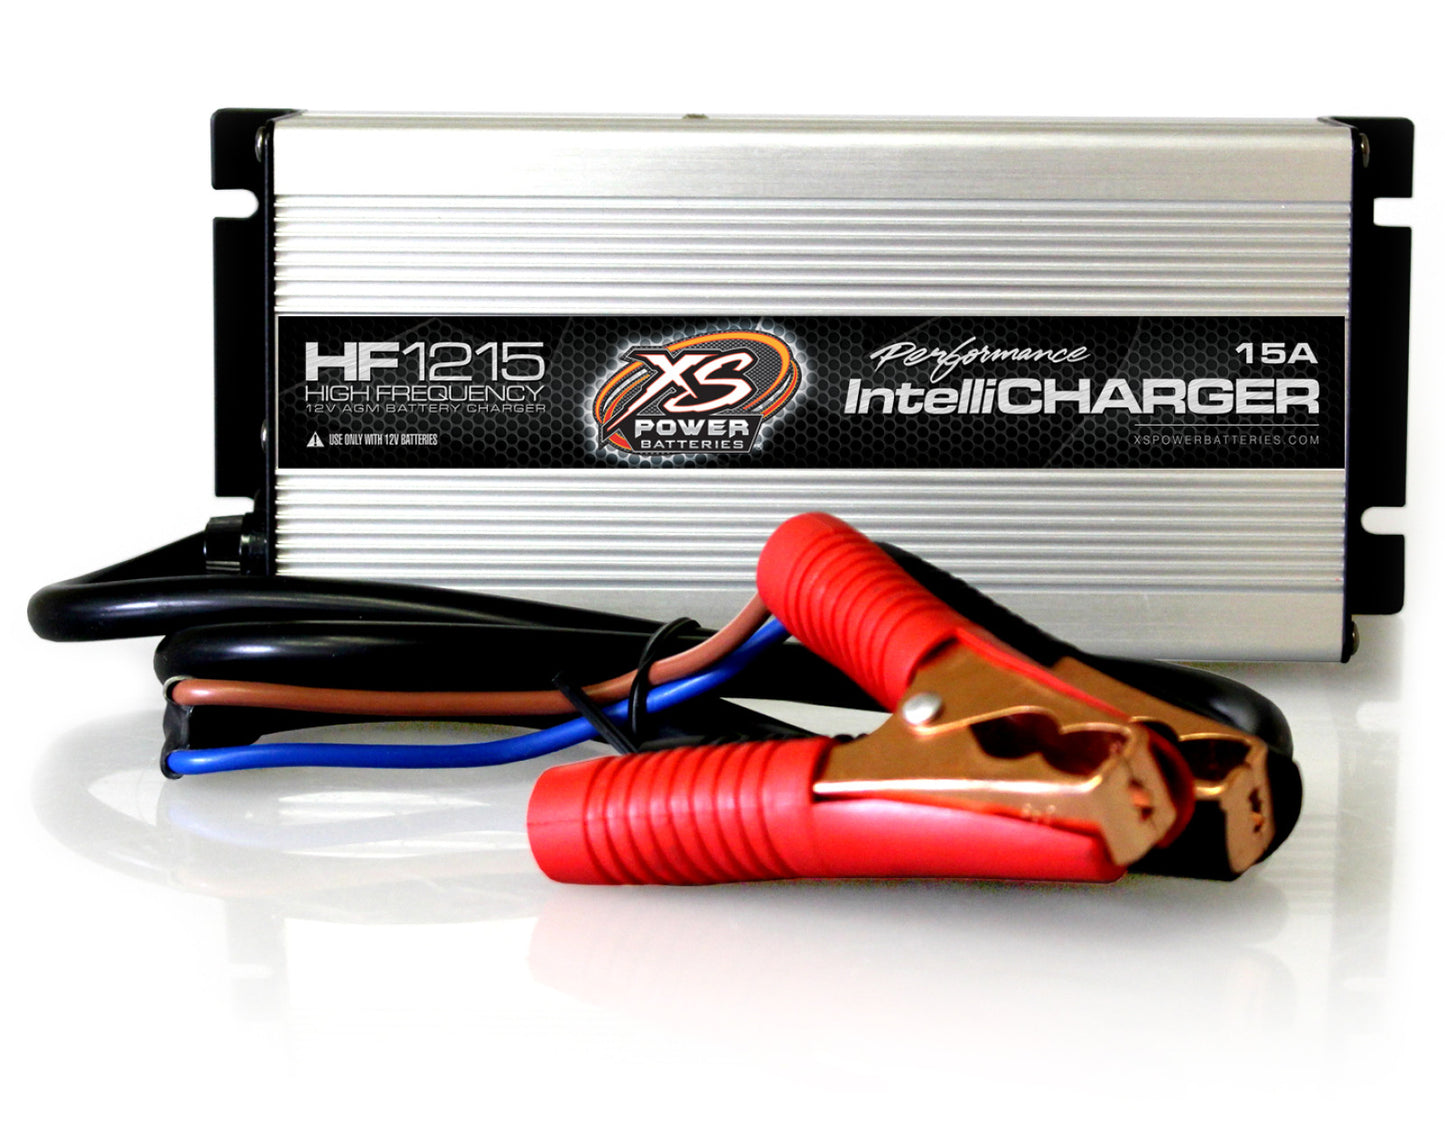 XS Power Batteries 12V High Frequency AGM IntelliCharger, 15A